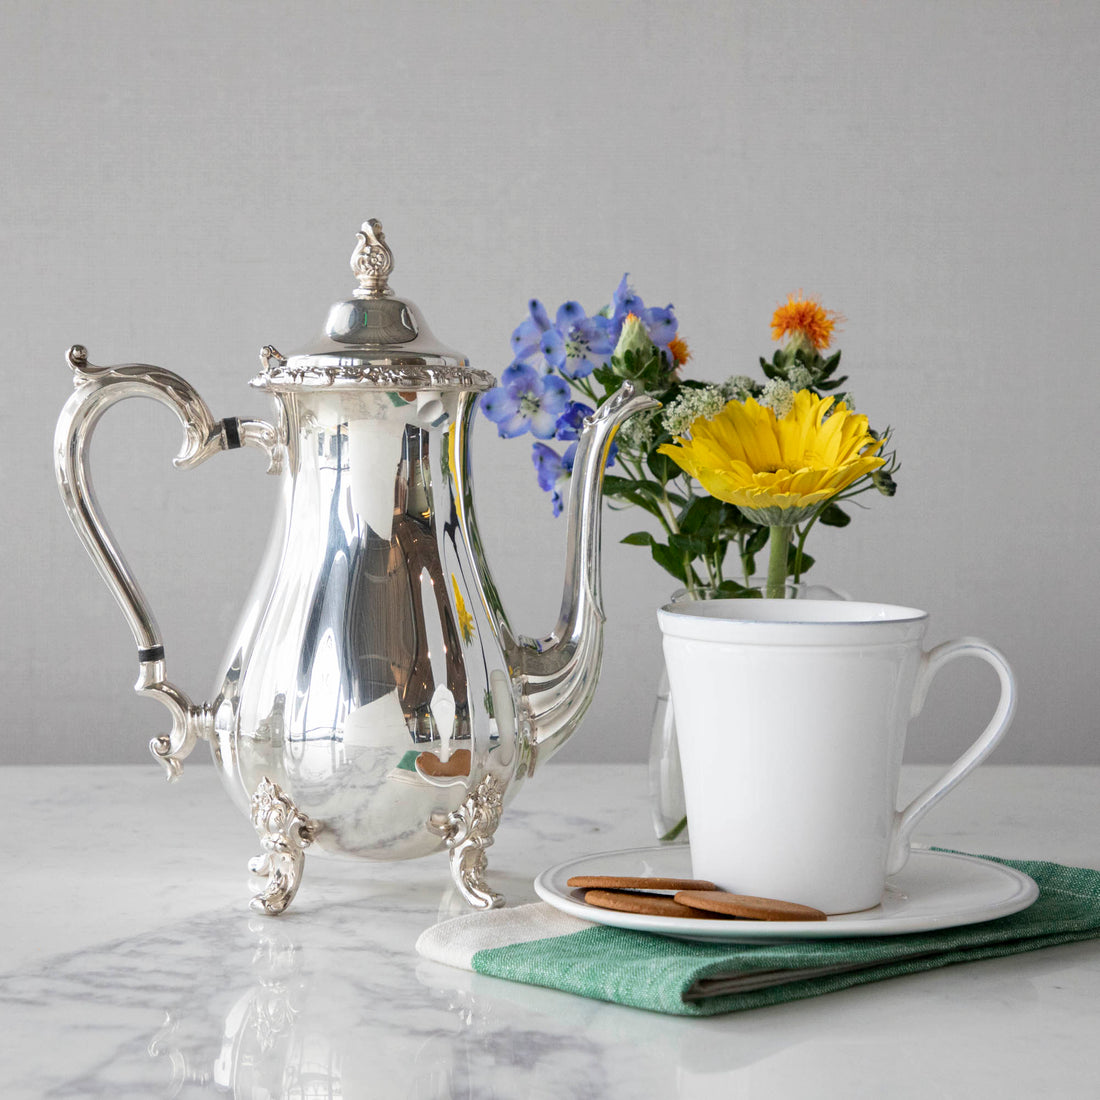 Hester &amp; Cook vintage silver-plate coffee server, white cup, and a bouquet of flowers on a marble countertop.